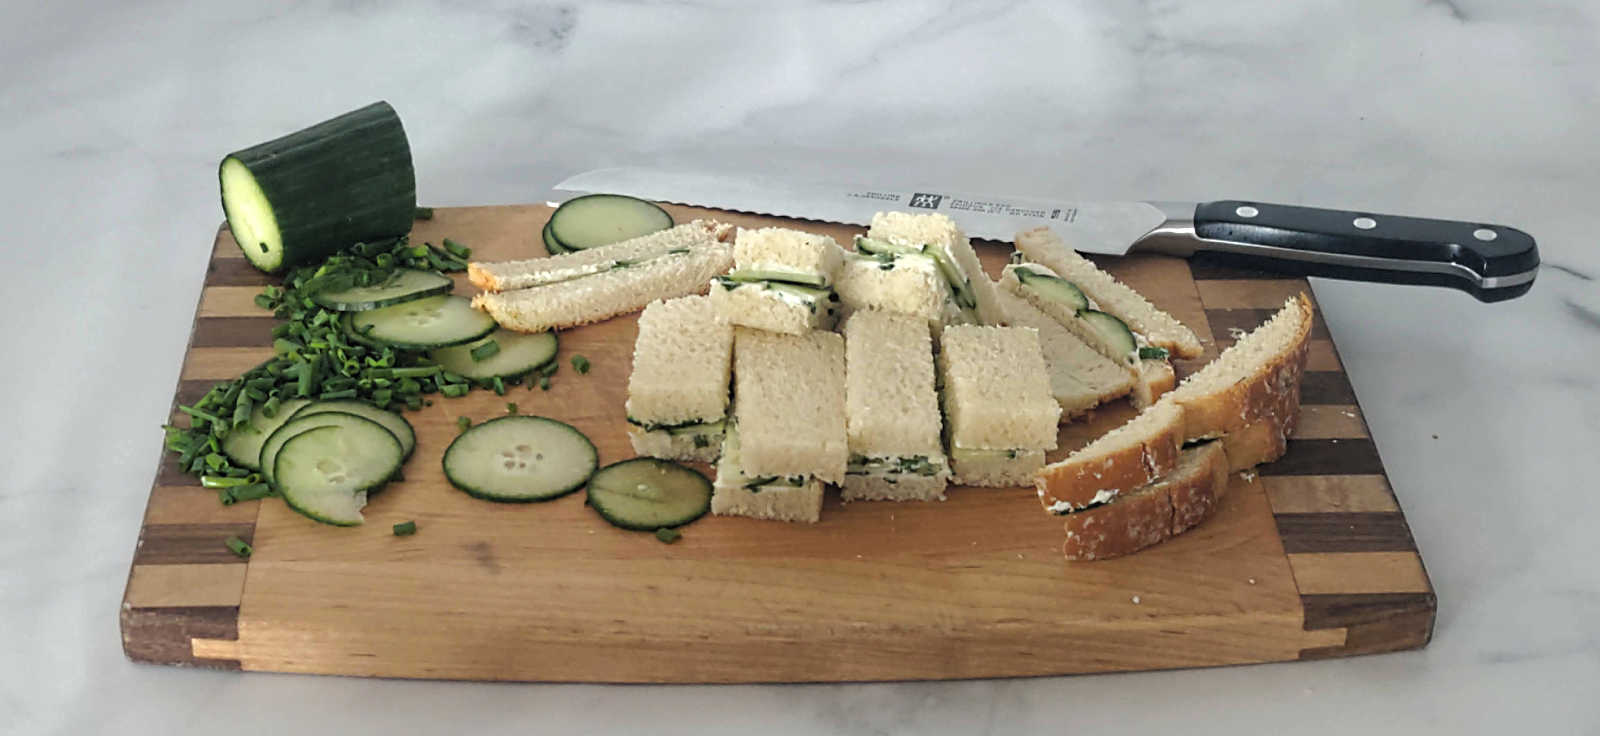 Afternoon Tea: Finger Sandwiches With Cucumber